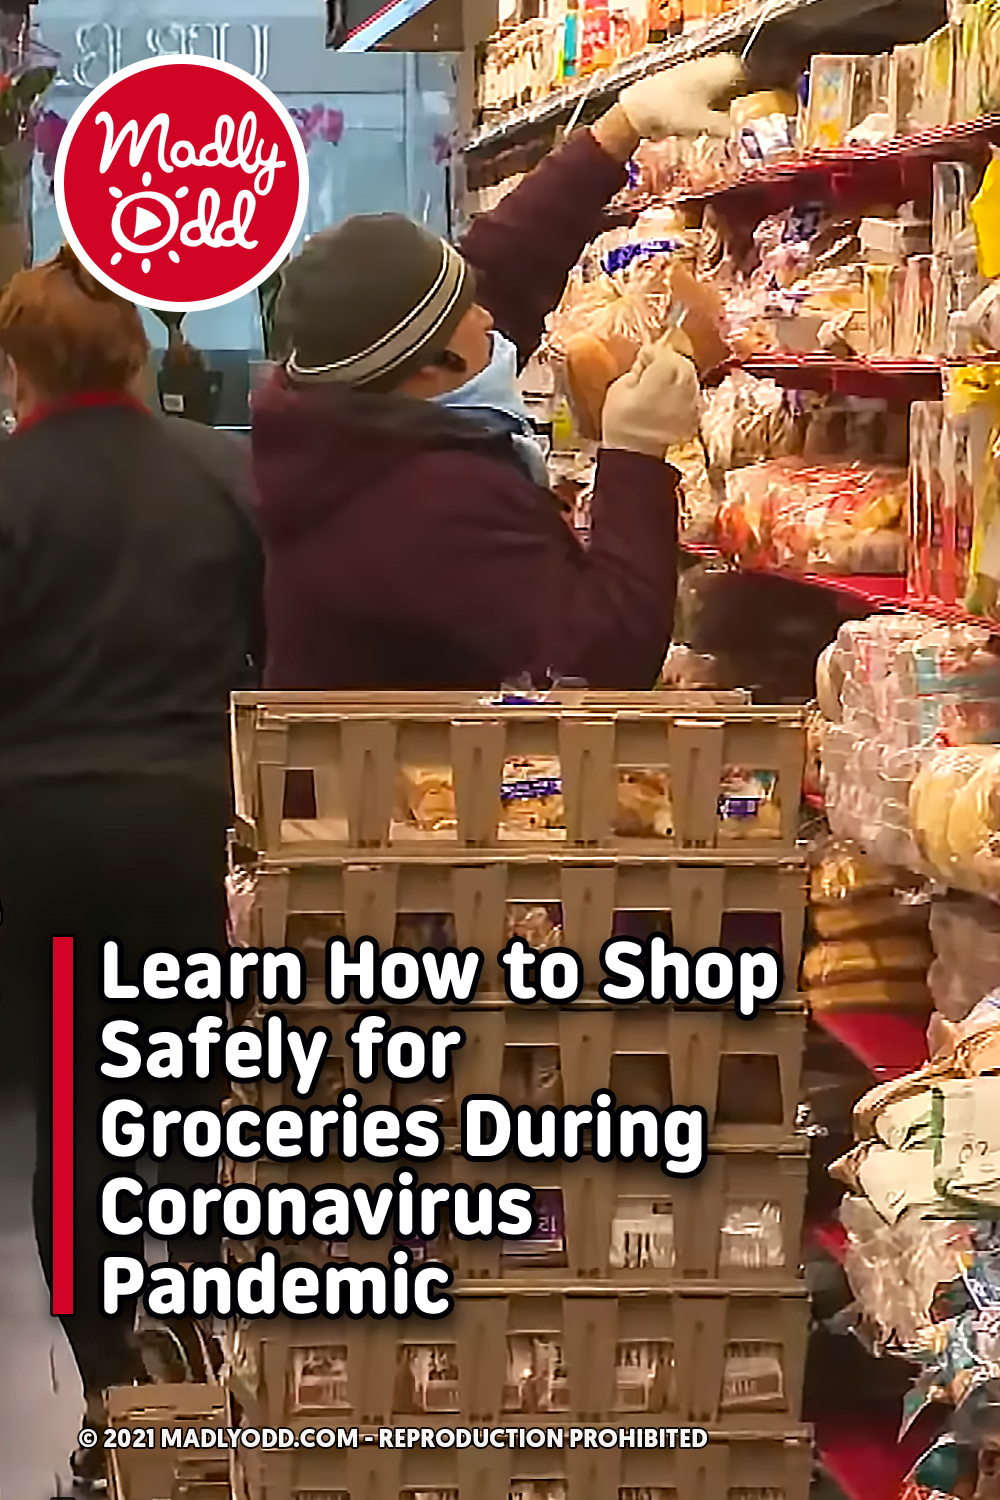 Learn How to Shop Safely for Groceries During Coronavirus Pandemic